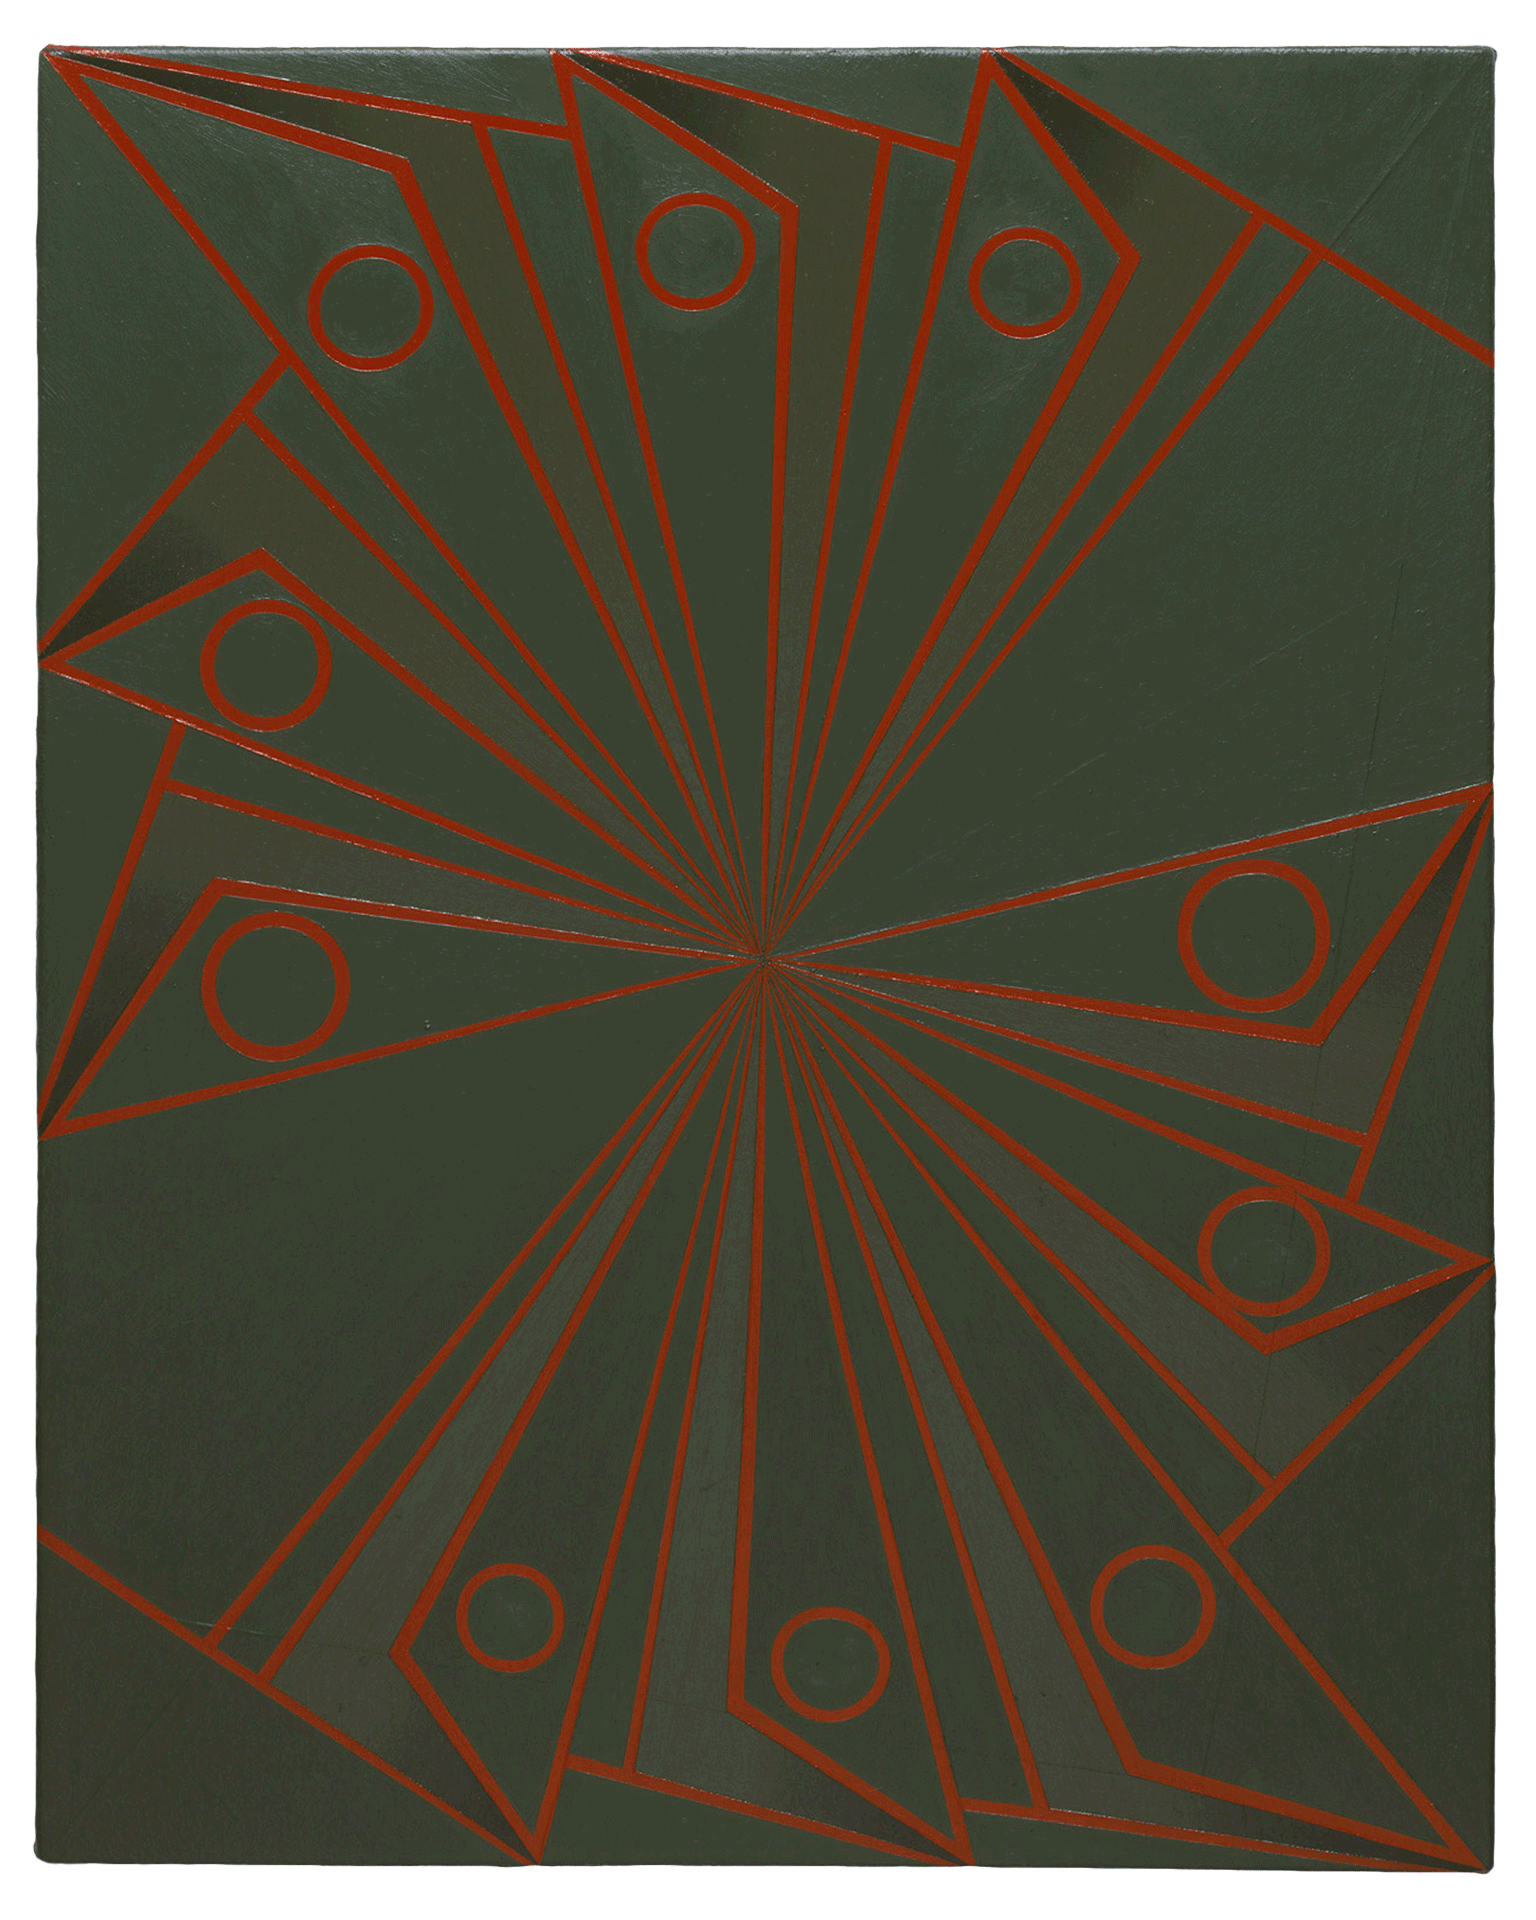 A painting by Tomma Abts, titled Thiale, dated 2004.